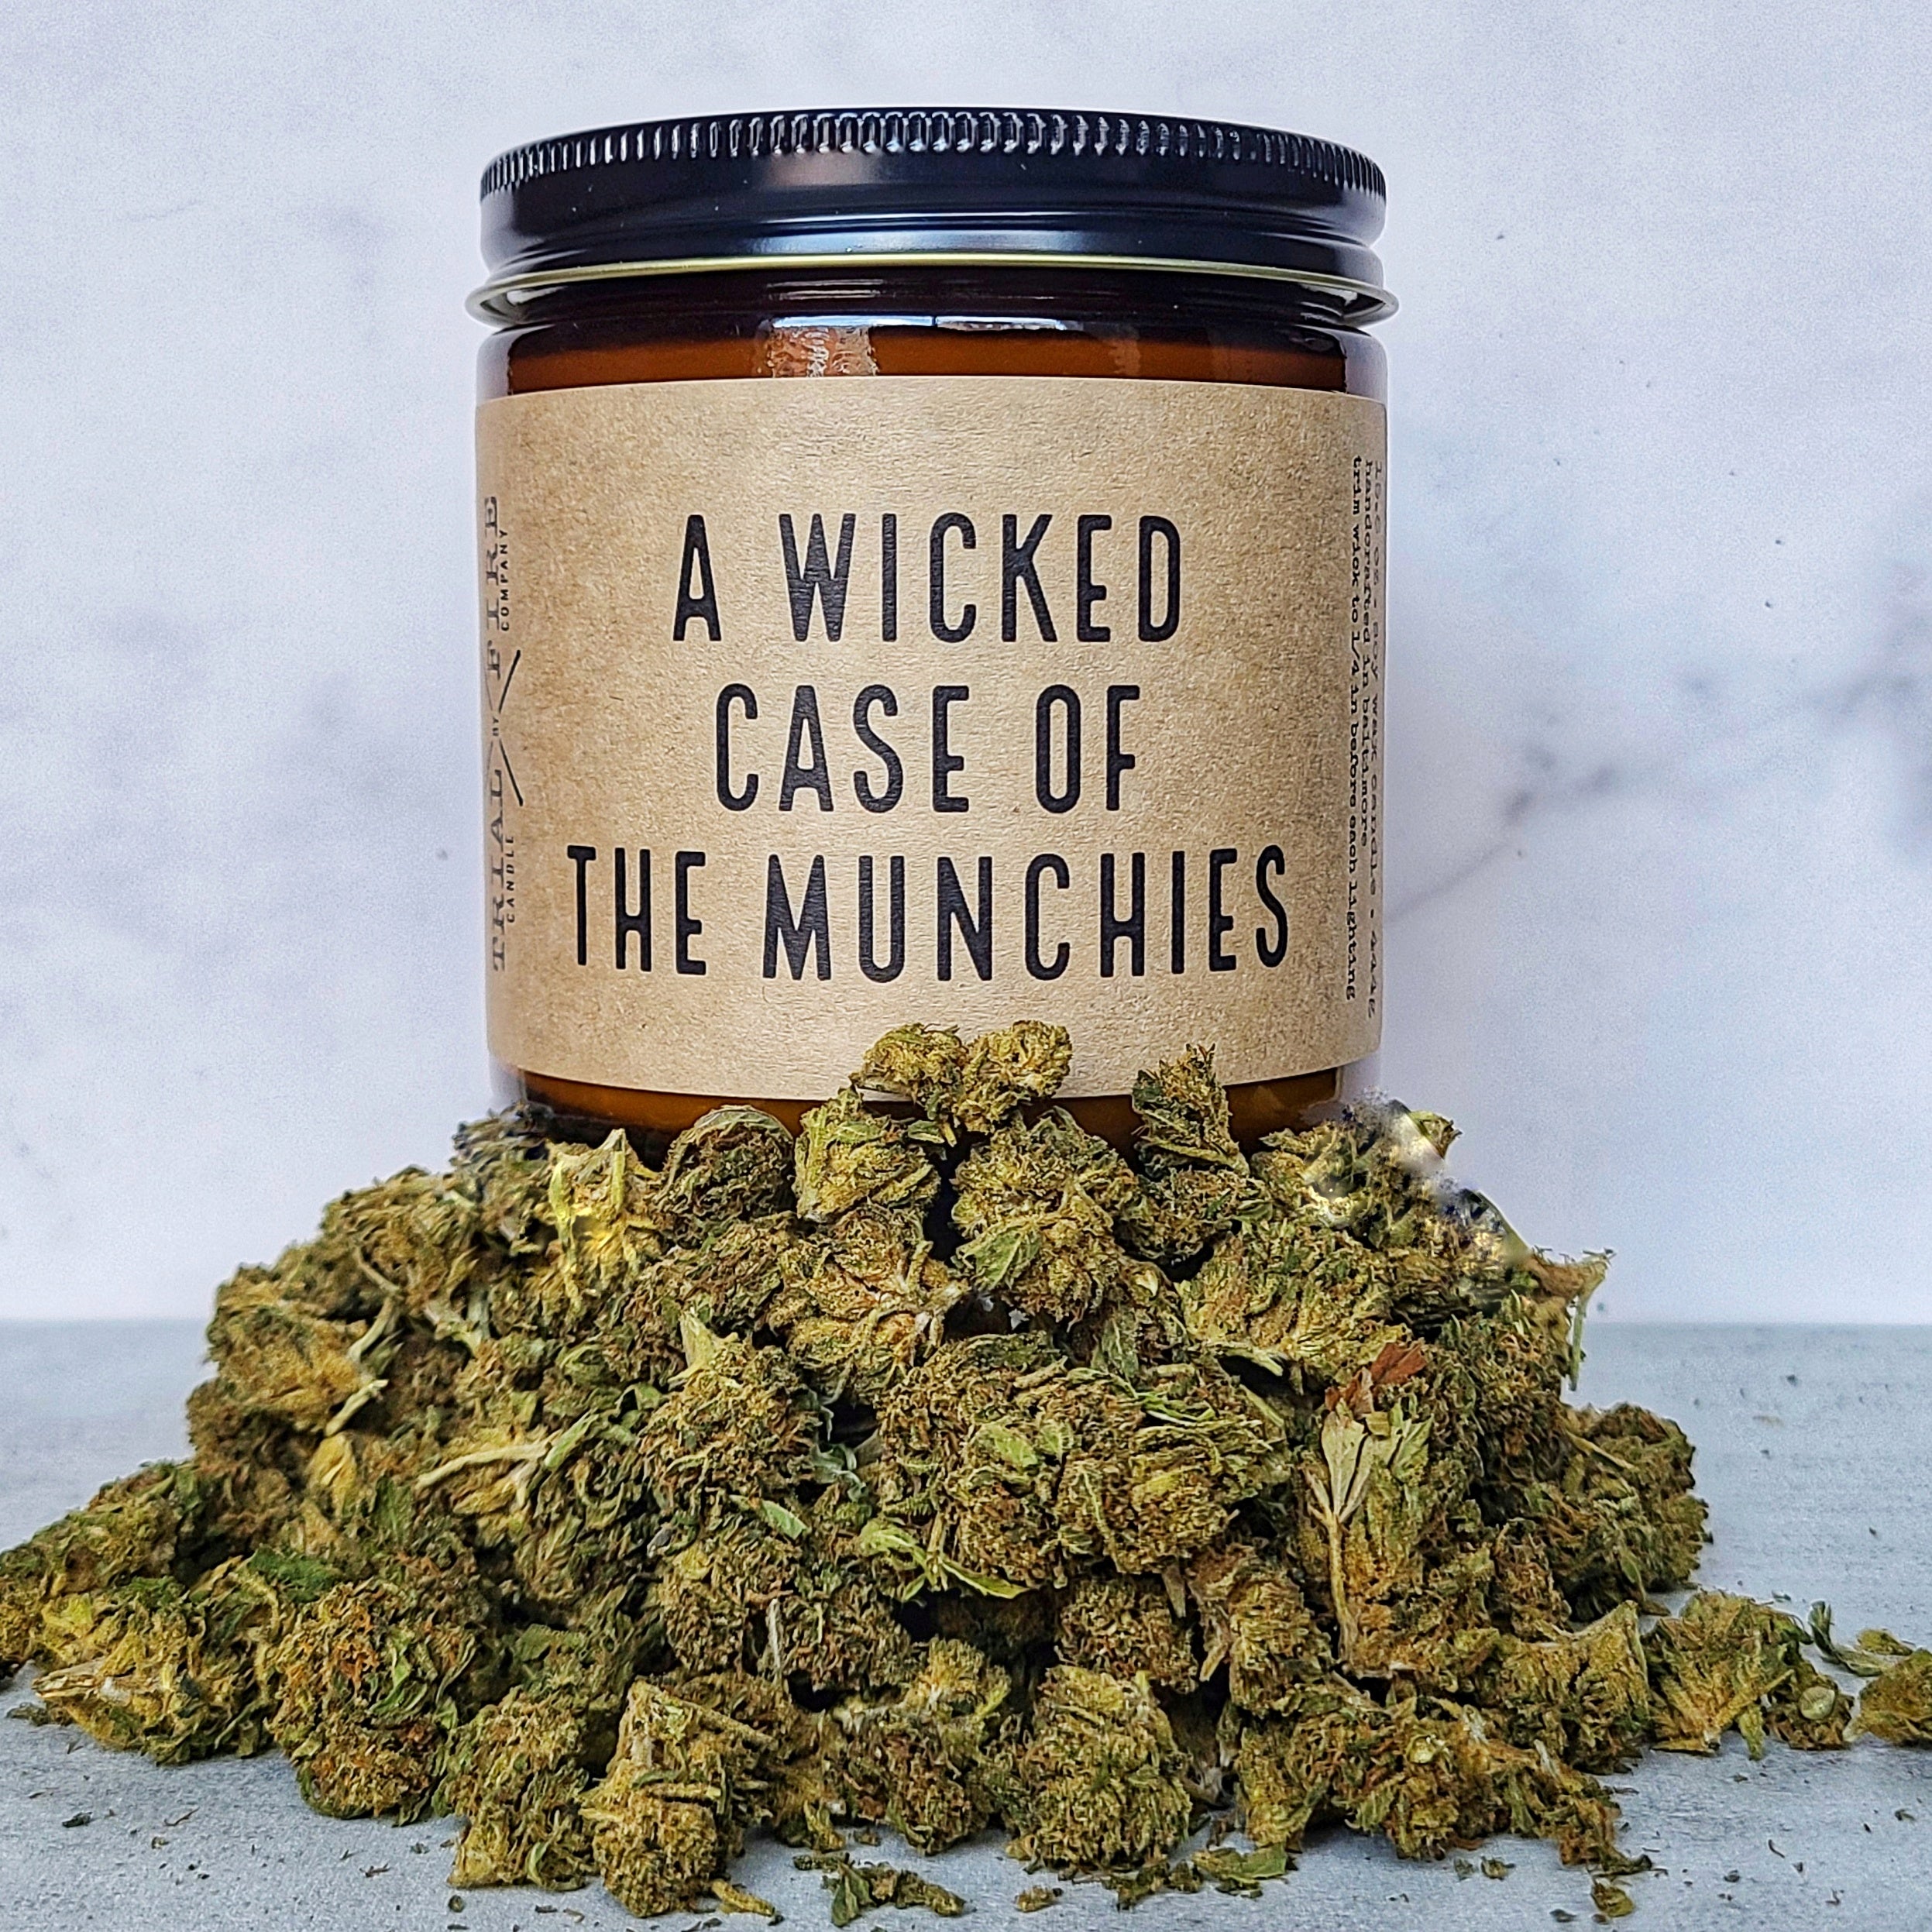 A Wicked Case of the Munchies